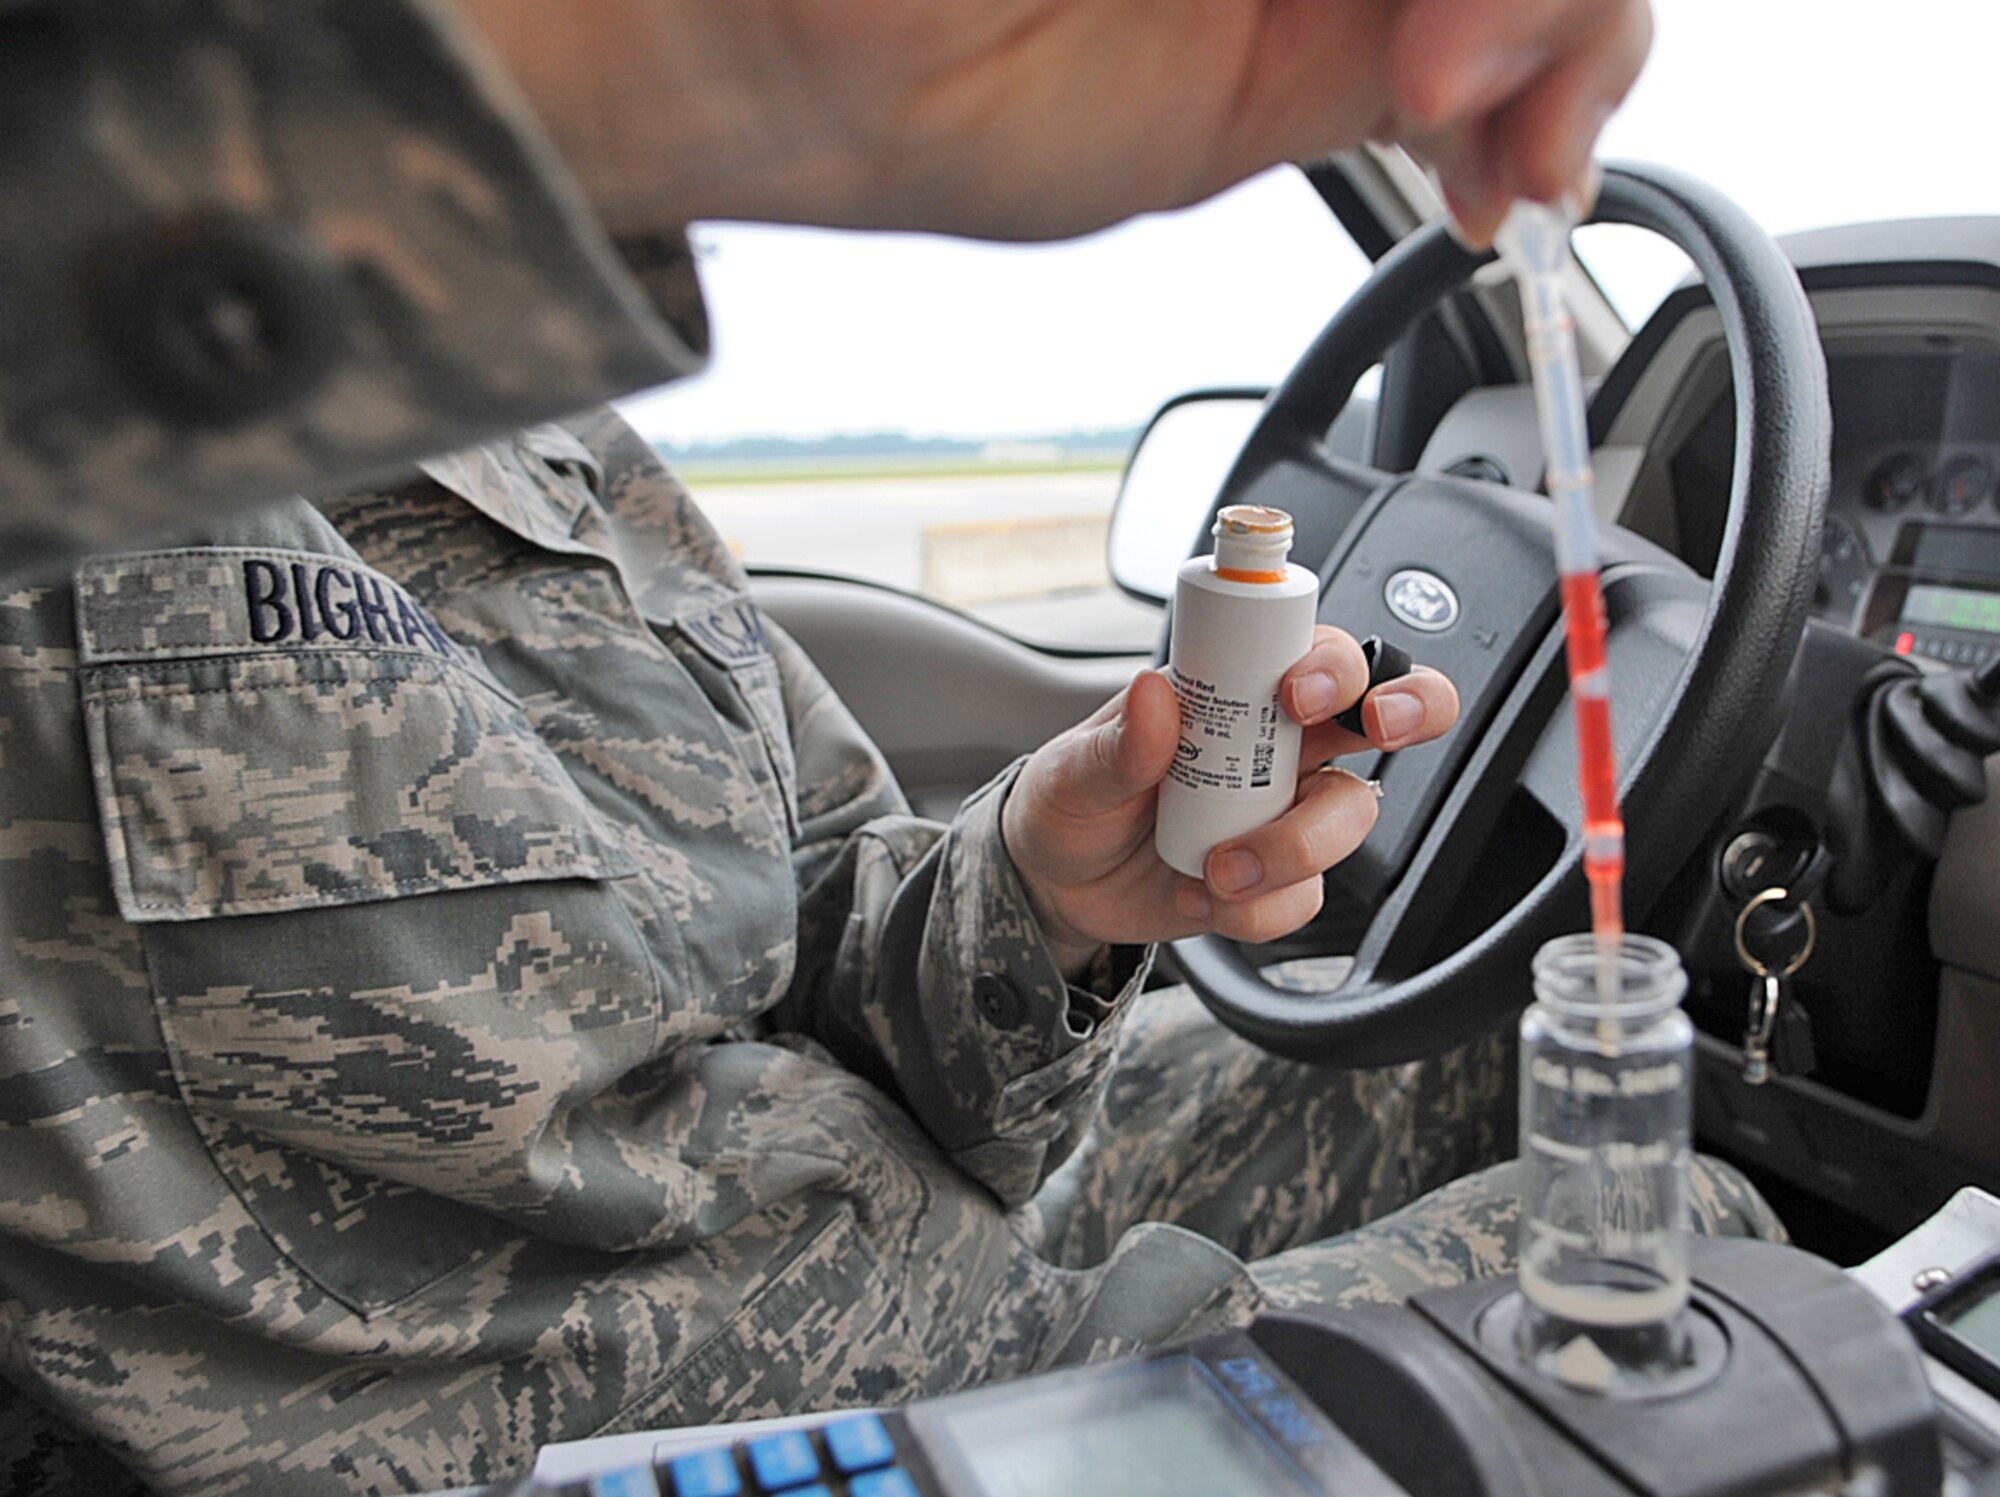 U.S. Air Force Senior Airman Kataryna Bigham tests the chlorine and pH levels in a water sample on Seymour Johnson Air Force Base, N.C., May 1, 2012. Water and fuels systems maintainers from the 4th Civil Engineer Squadron collect water samples from several locations around base daily to ensure it is safe for consumption. Bigham, 4th CES water and fuels systems maintenance journeyman, hails from Maybee, Mich. (U.S. Air Force photo/Airman 1st Class Aubrey Robinson/Released)